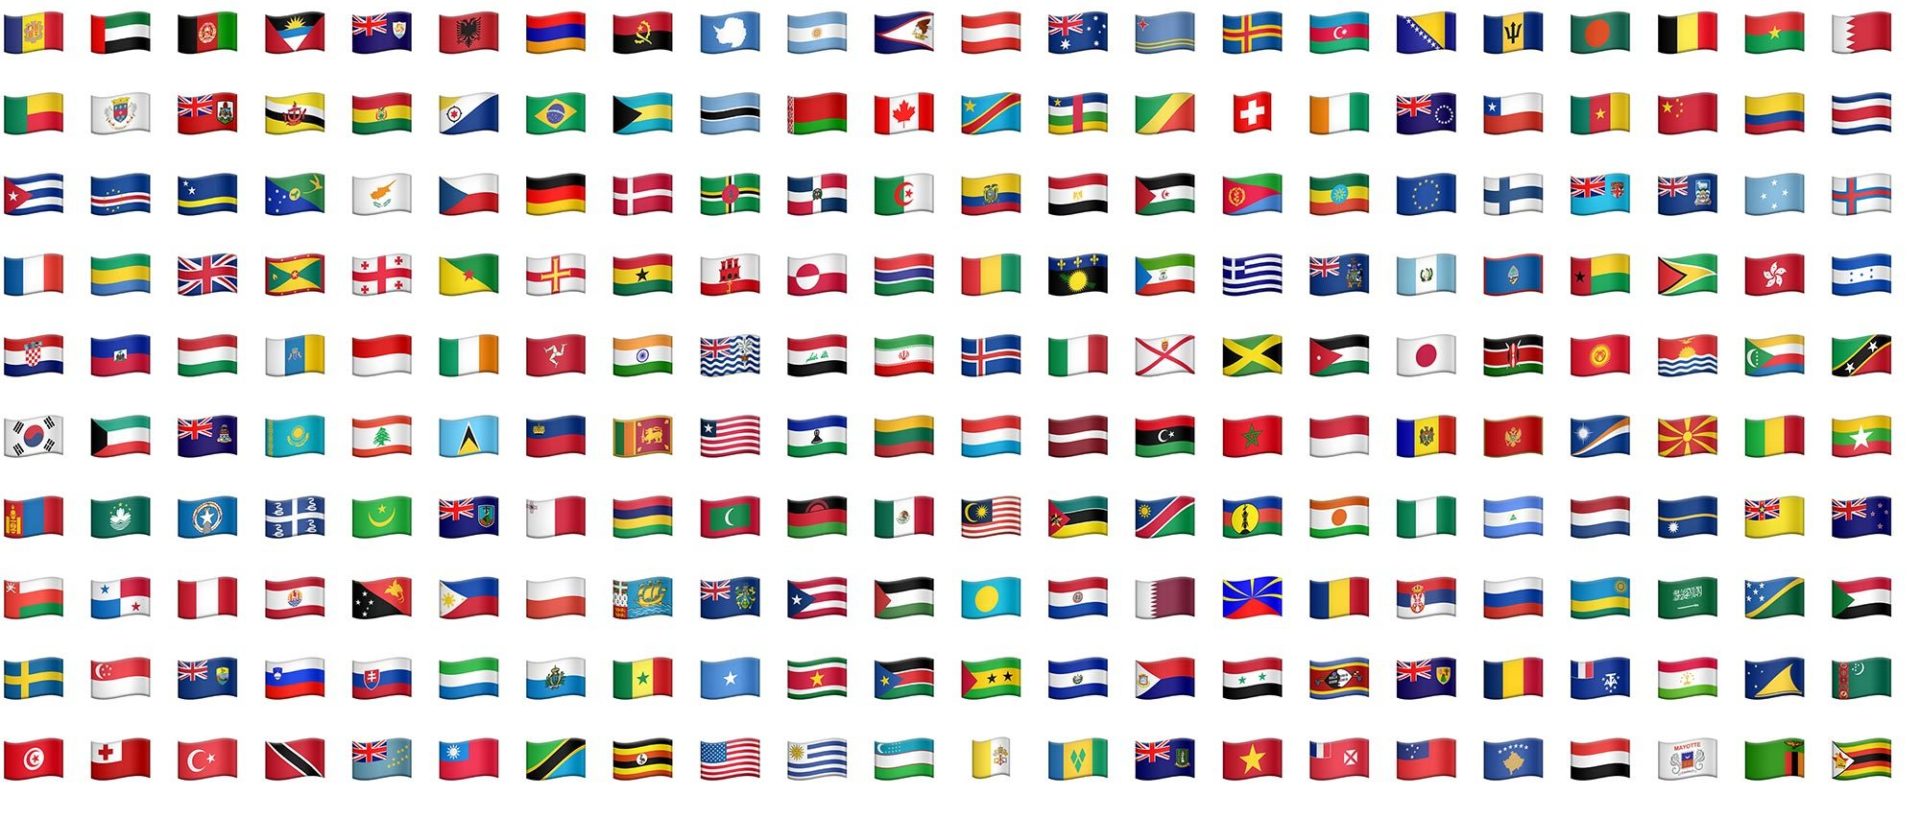 Different emoji flags for many countries and languages